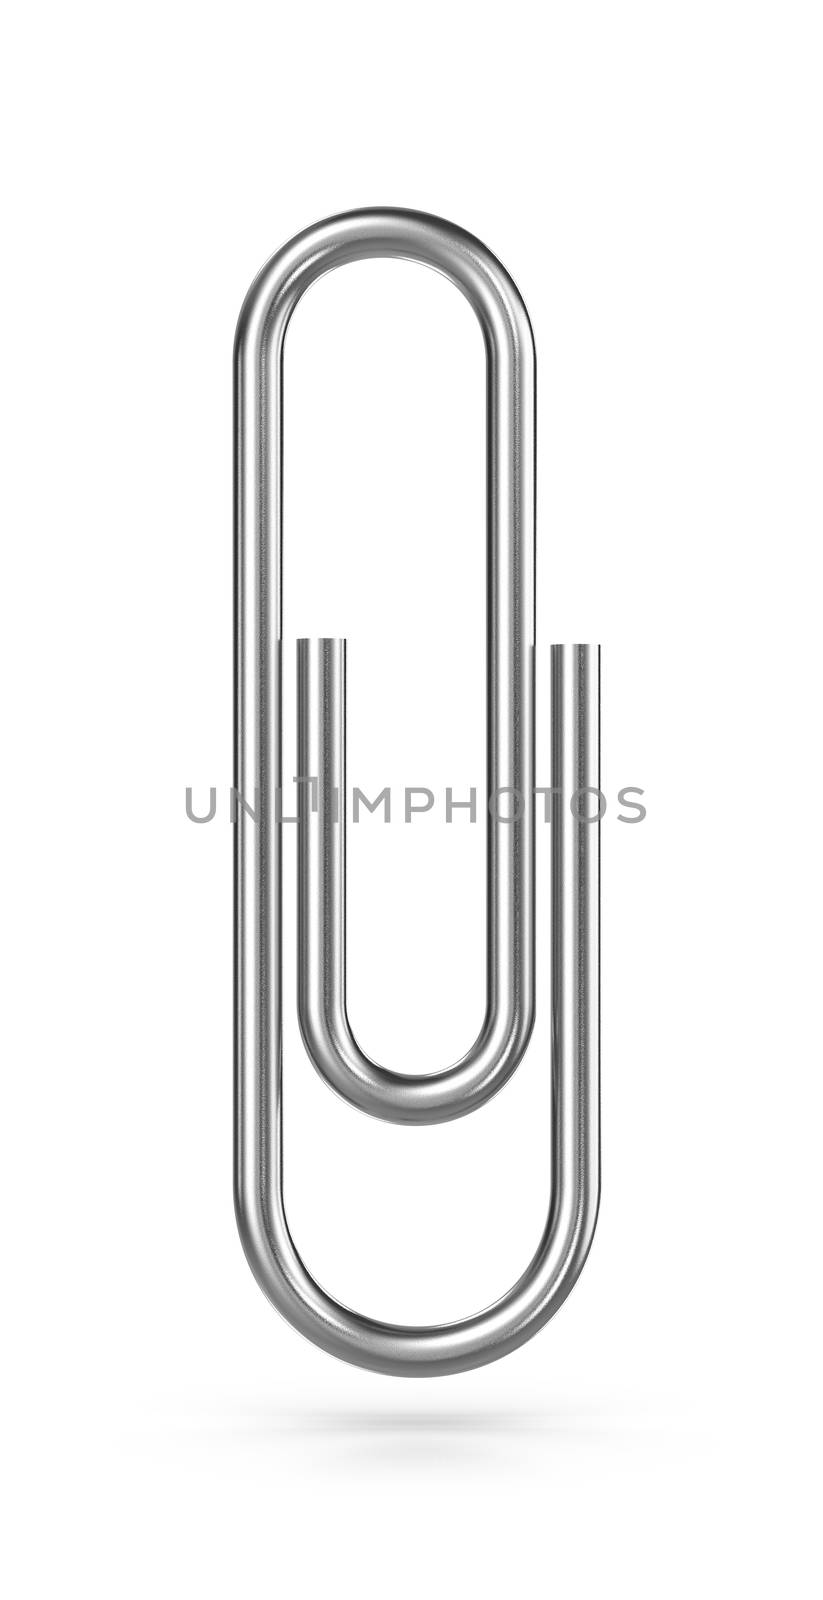 One Single Metallic Paperclip Isolated on White Background 3D Illustration